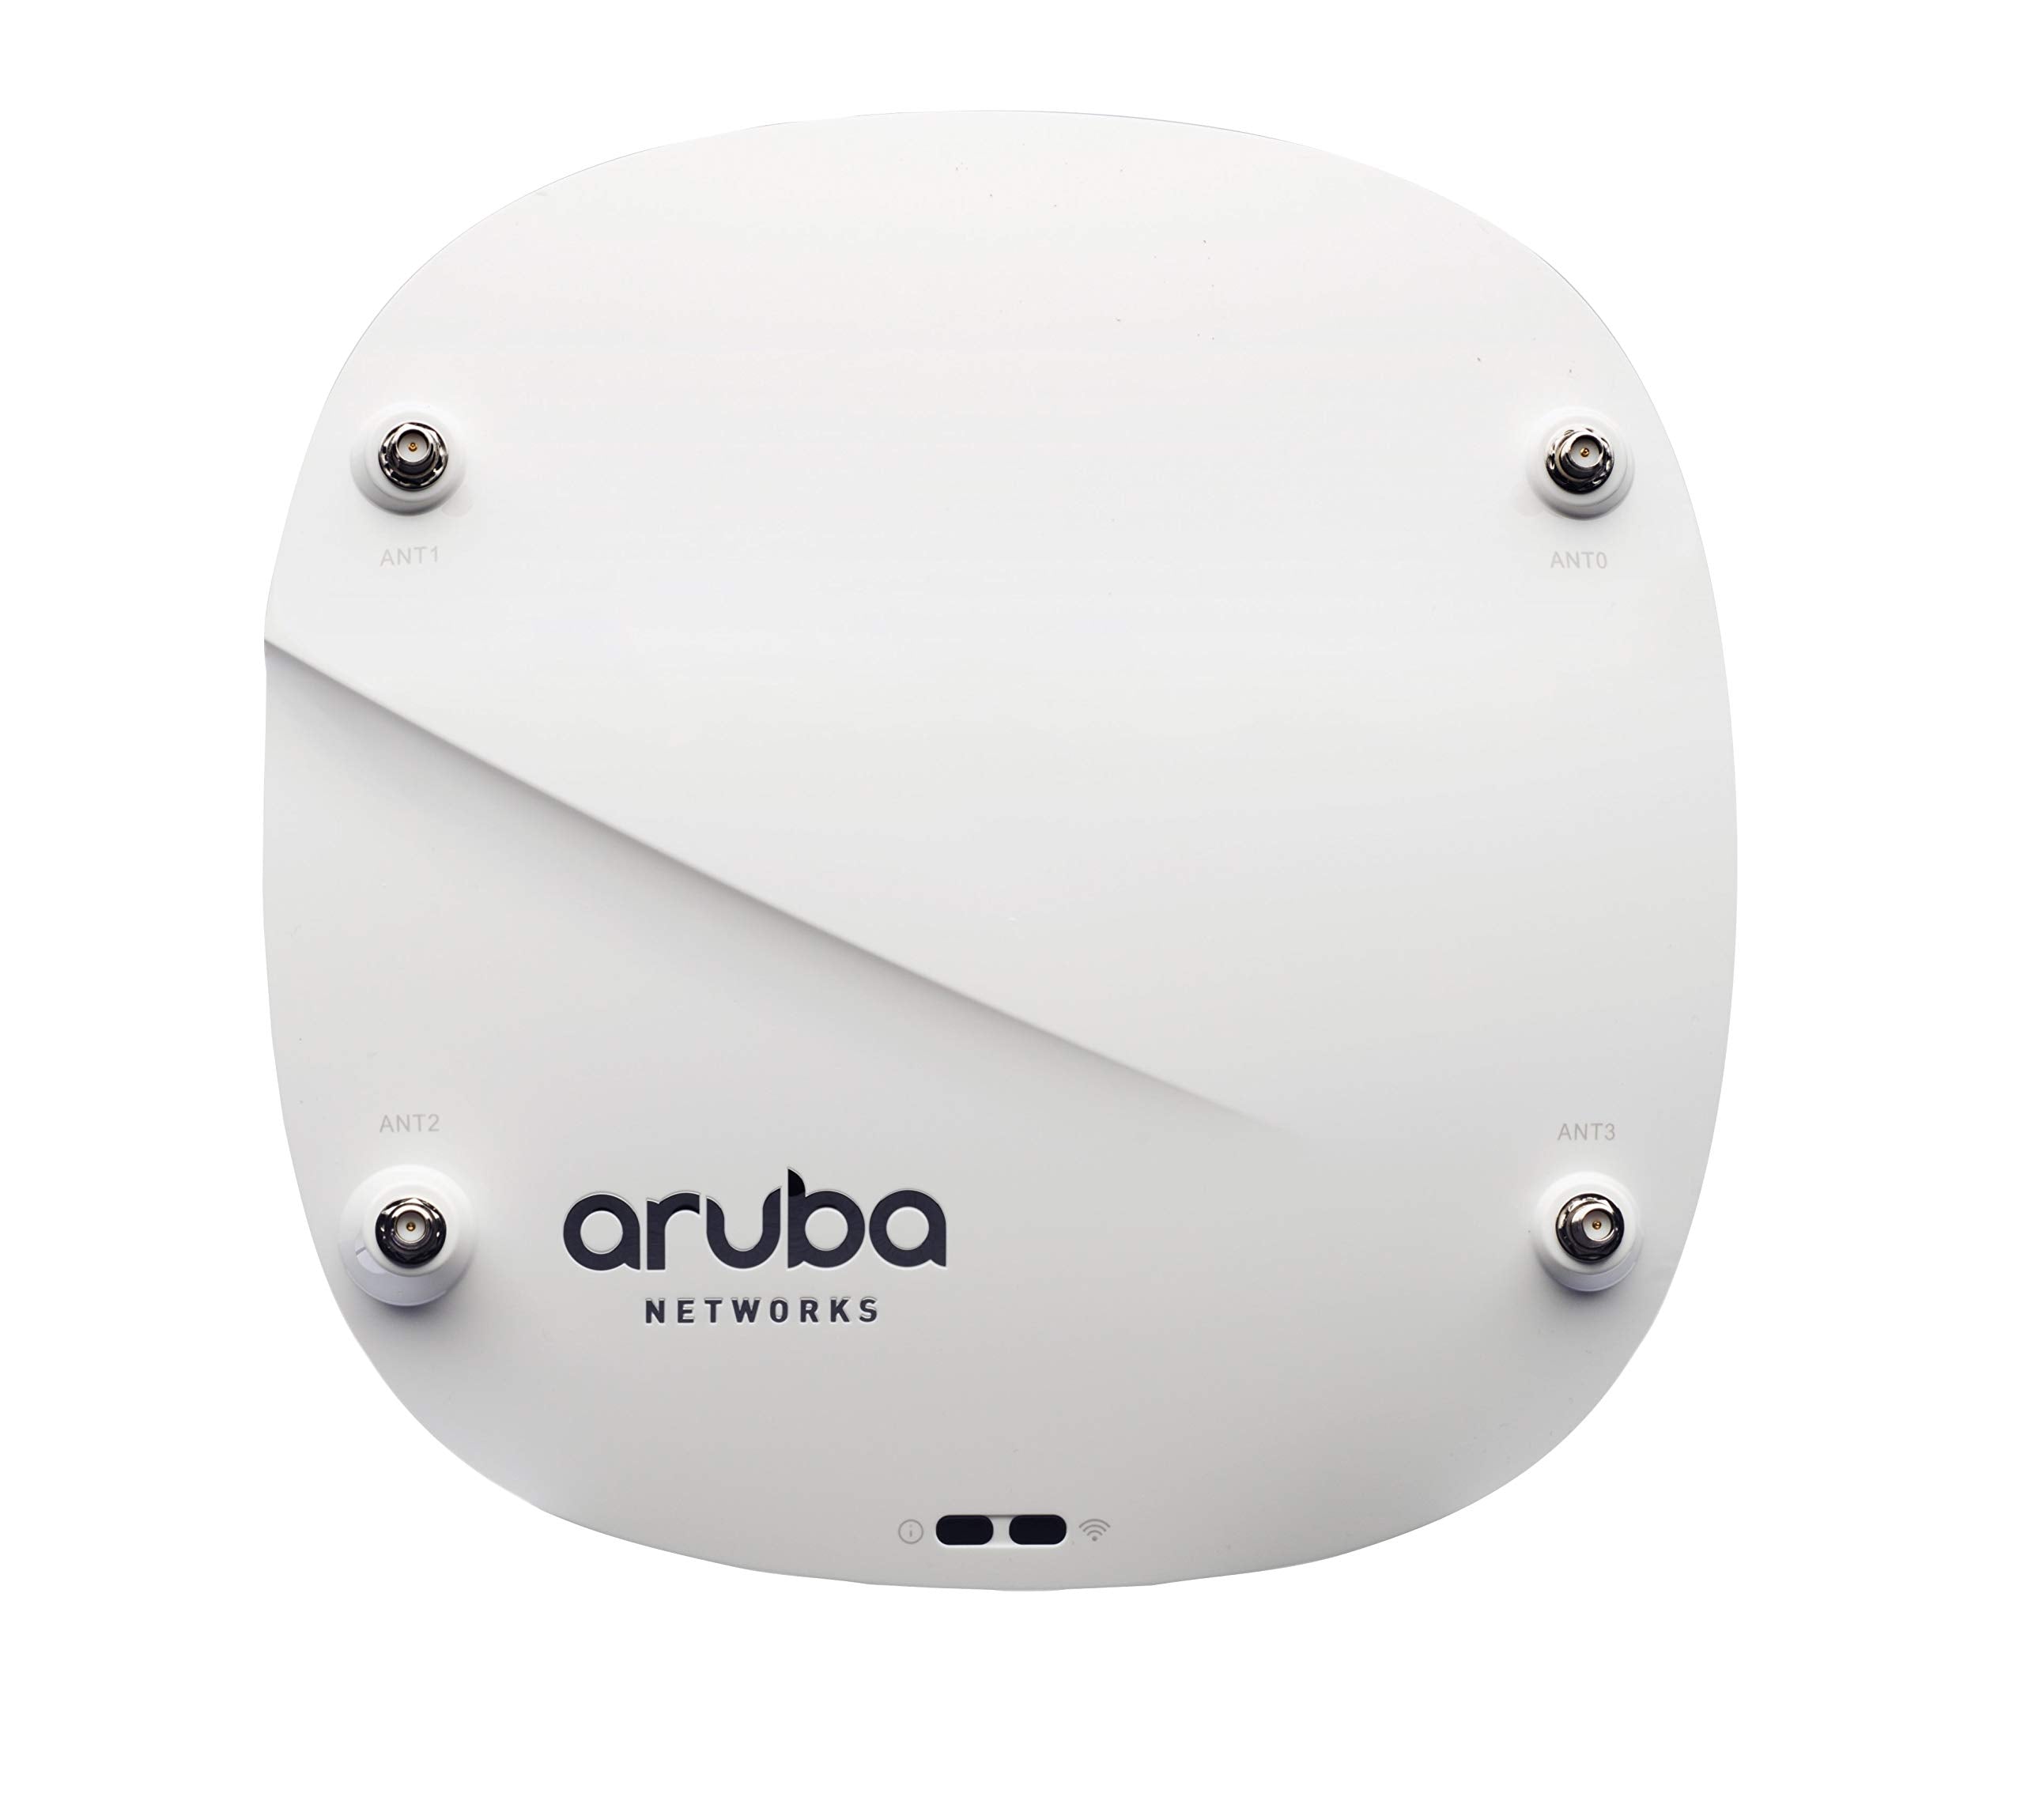 HPE ARUBA JW795A AP-314 - Dual Band 2.4GHz (Up to 300Mbps)/5GHz (up to 1733Mbps), Wireless 802.11ac, MU-MIMO, Bluetooth, 2x2/4x4, controller-managed Wireless Access Point